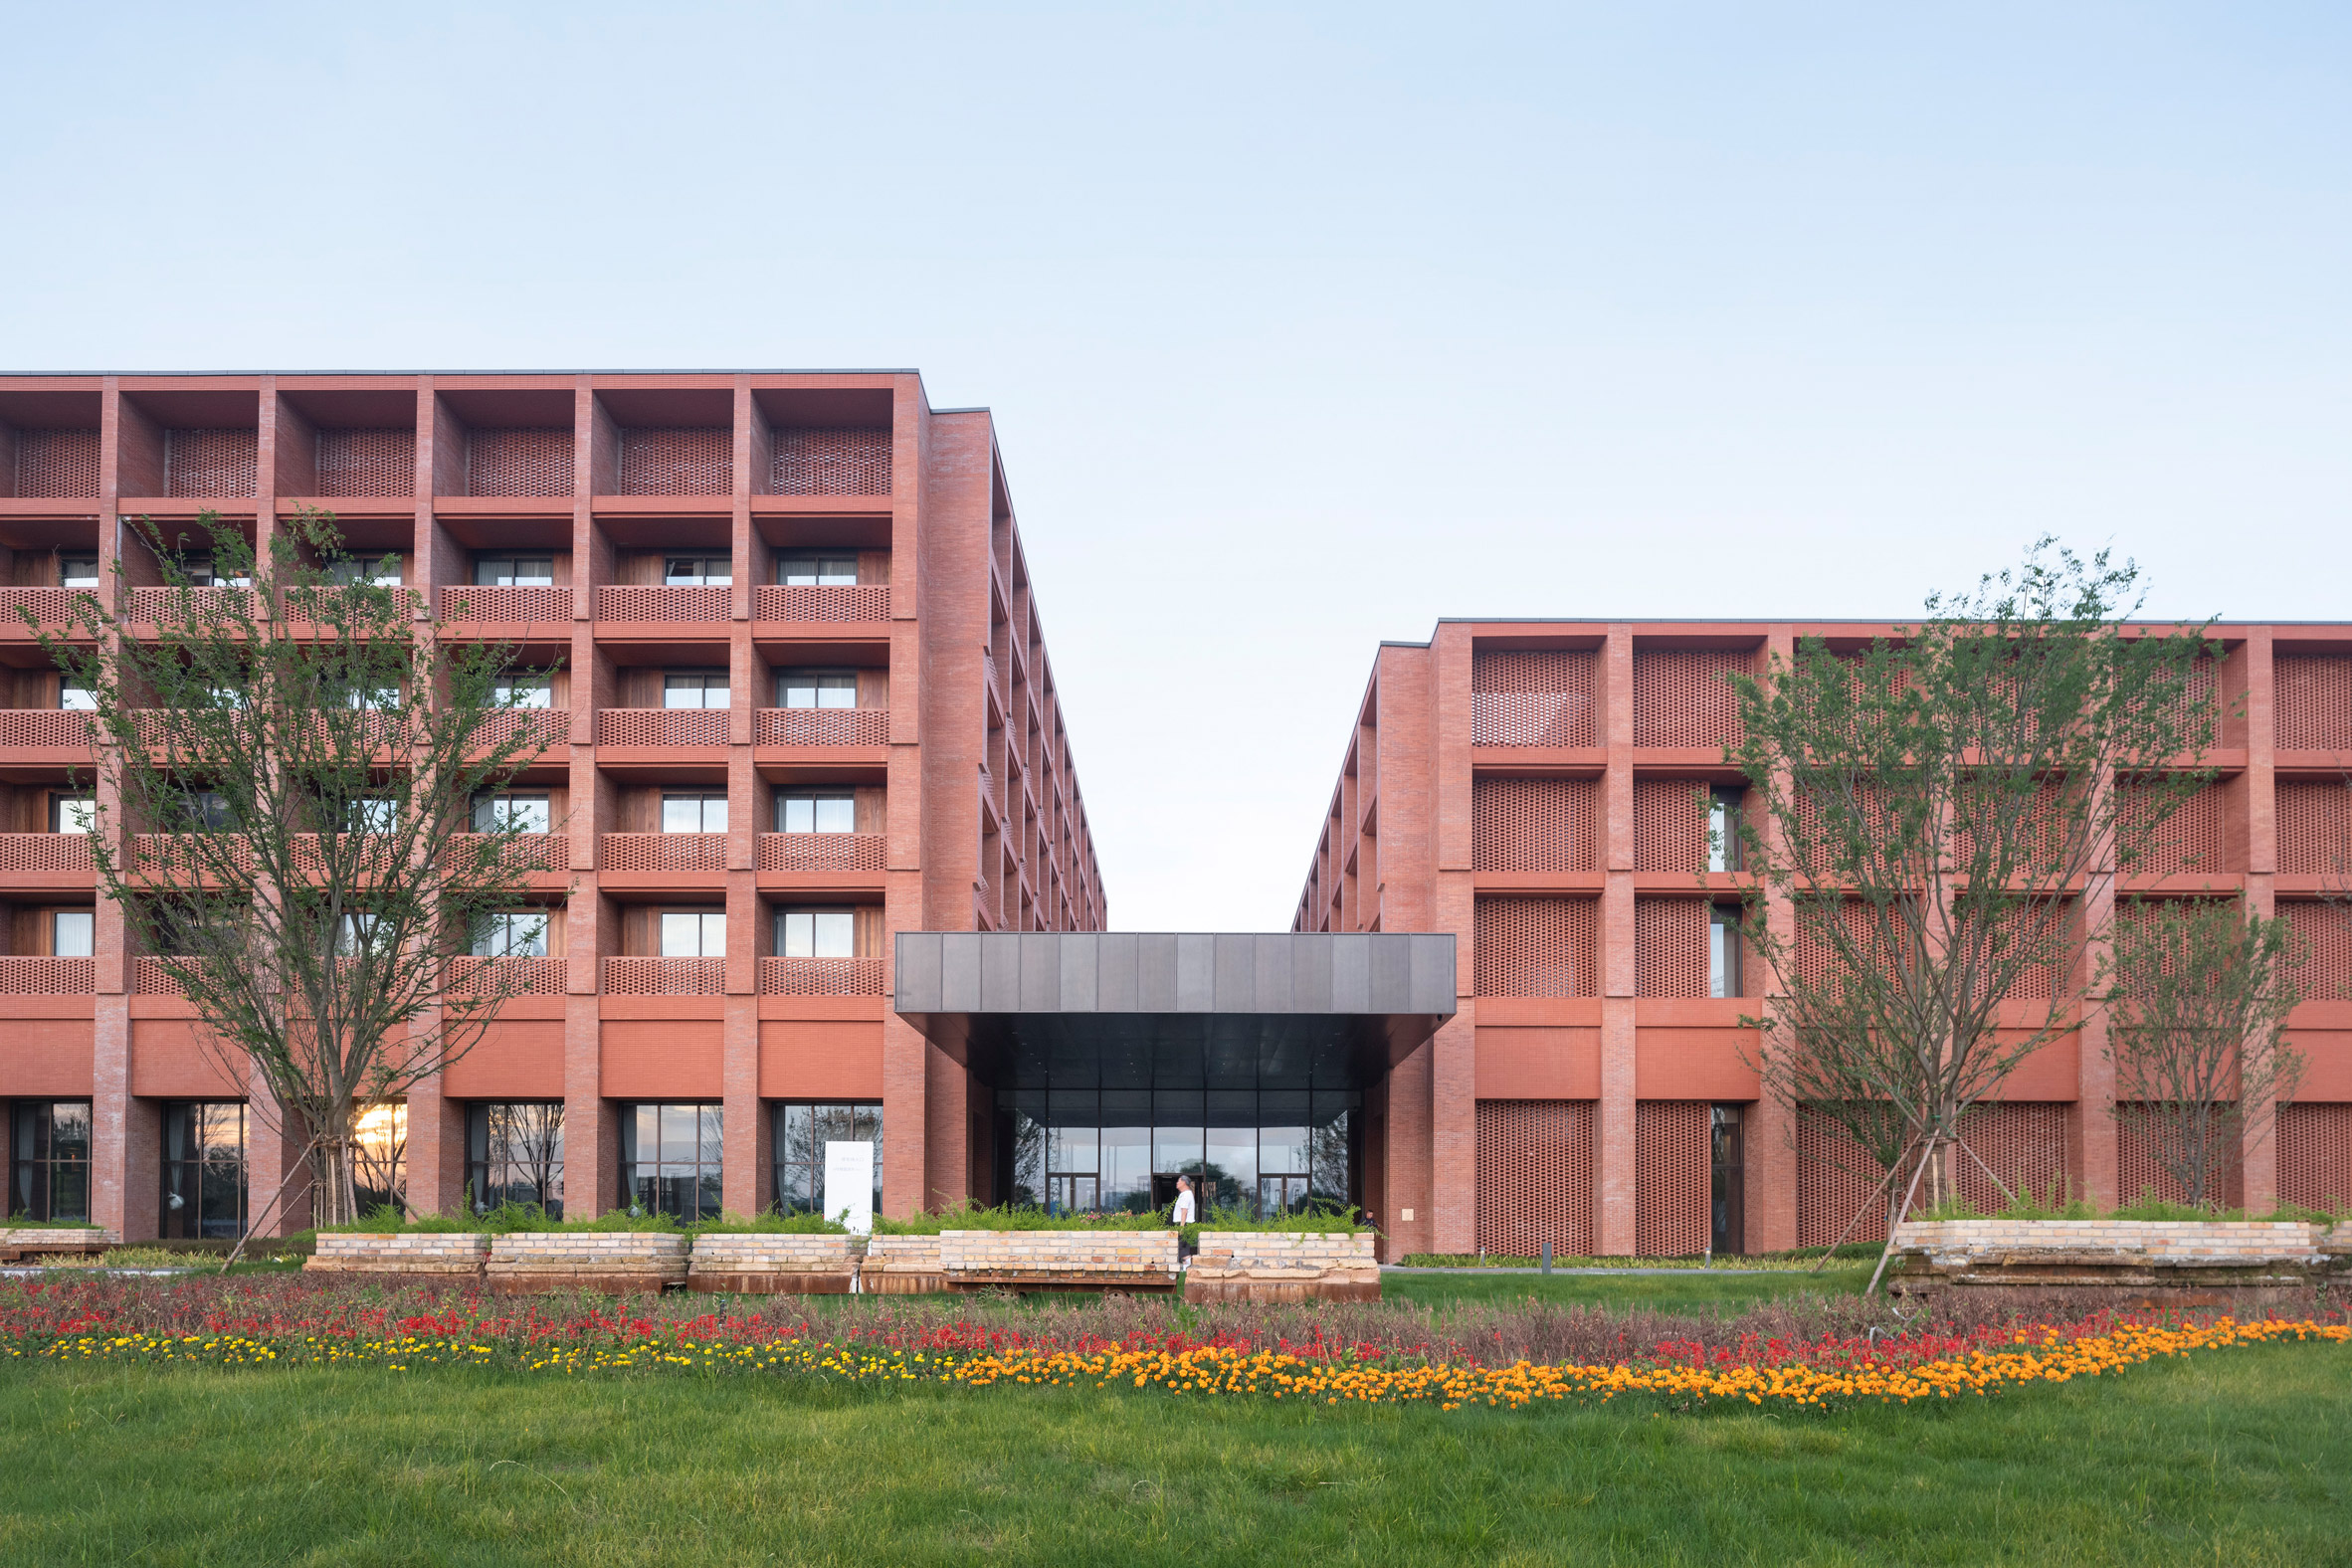 Hotel complex entrance, Ceramic Art Avenue Taoxichuan by David Chipperfield Architects